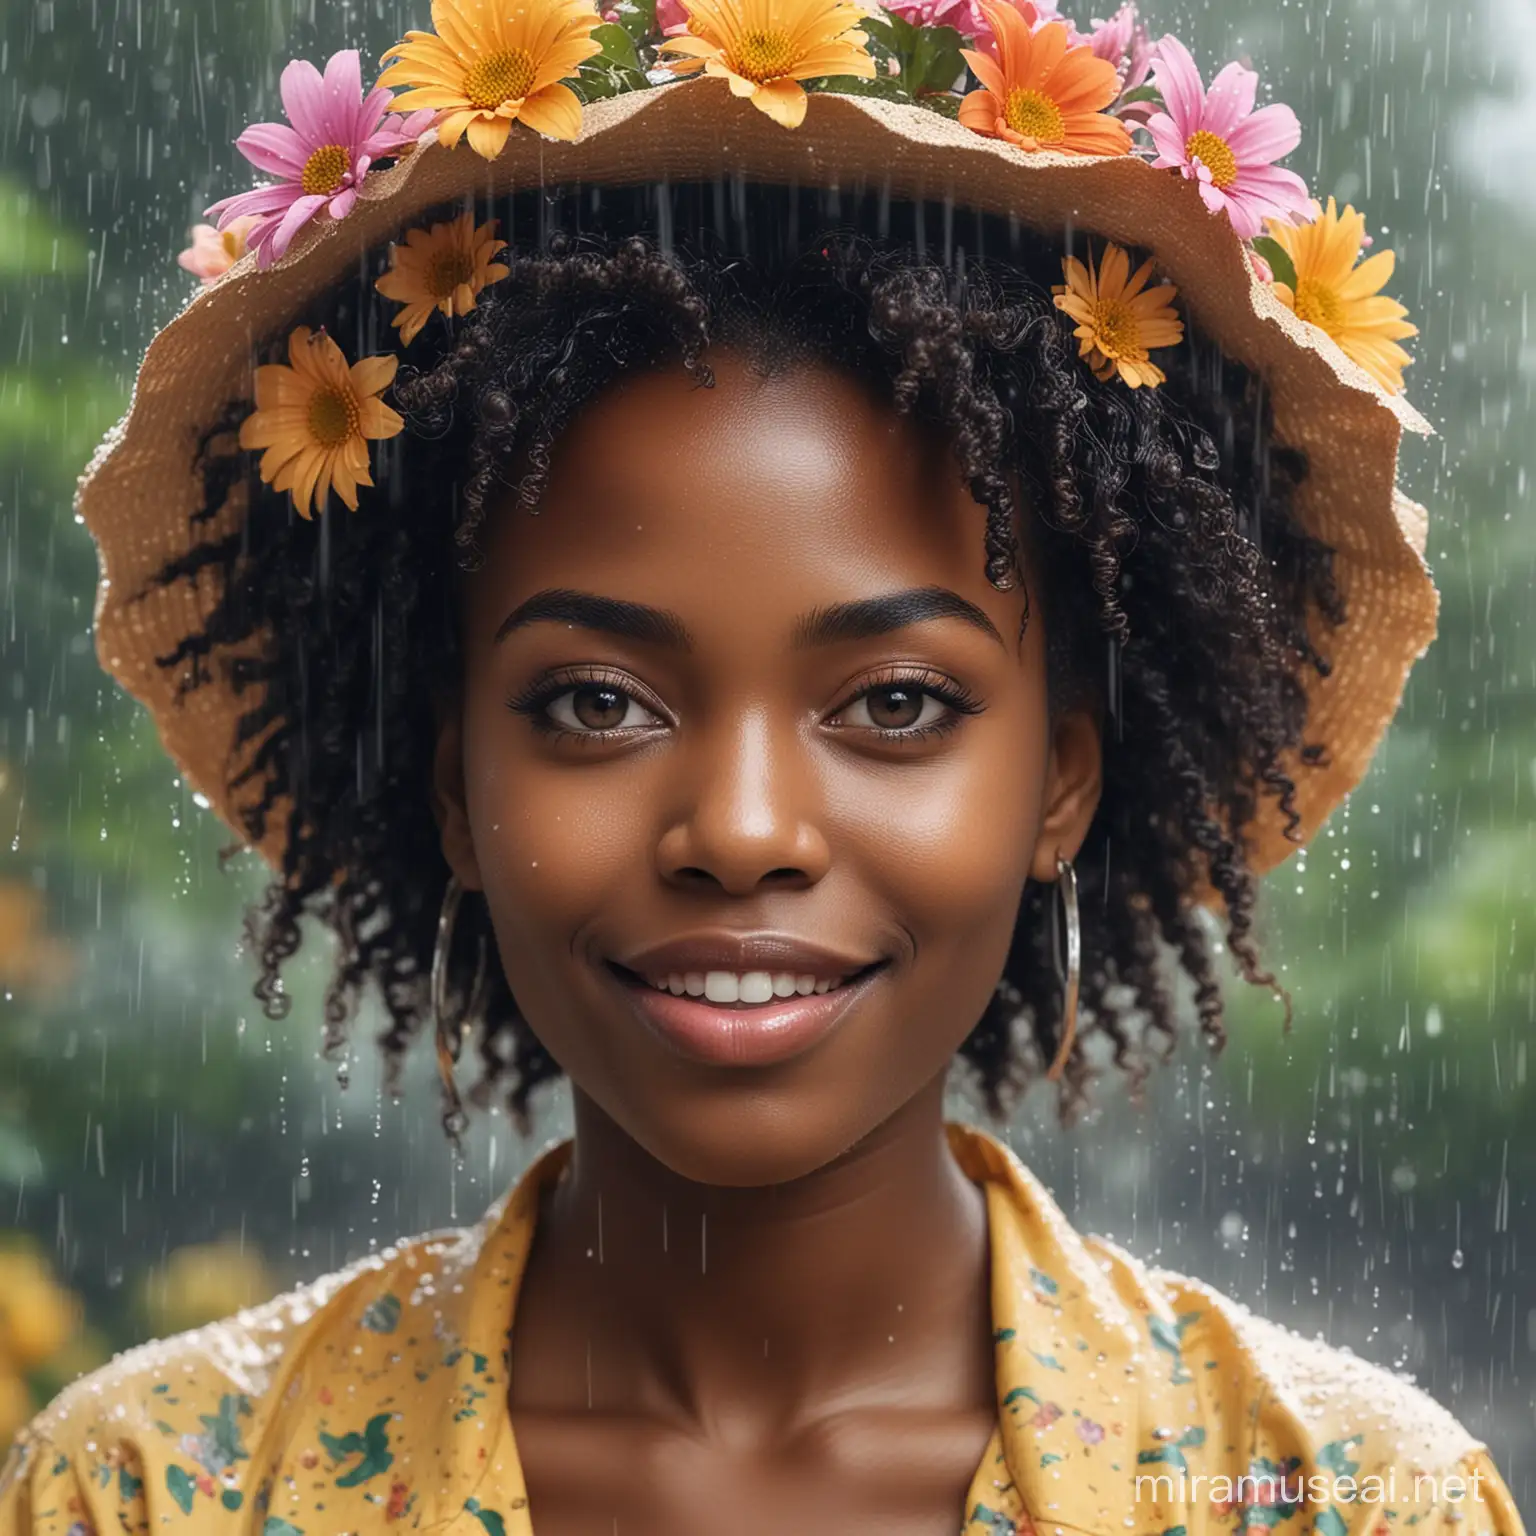 CREATE AN AI IMAGE OF A BLACK LADY NAMED APRIL WHO IS FOREVER YOUNG, Mischievous, Adventurous, Free-spirited  AND WHO Likes Rainy Days, Environmental stability, Flowers Surprise AND Parties